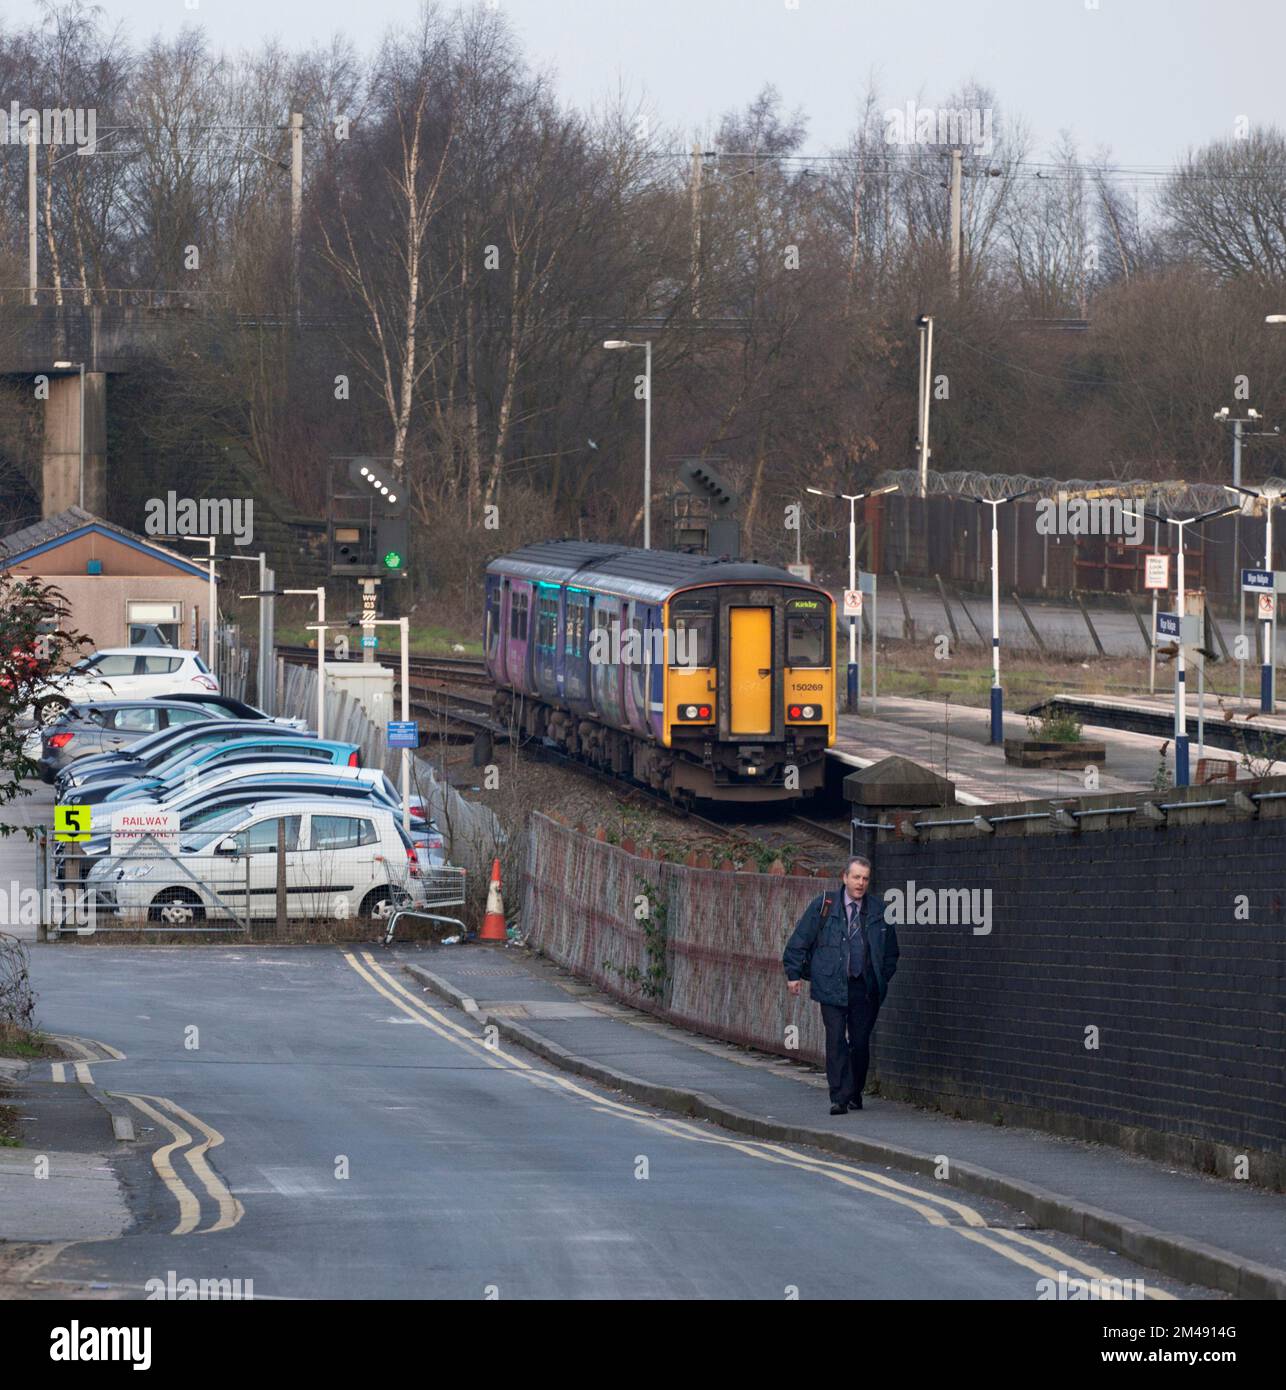 Northern Rail class 150 sprinter train at Wigan Wallgate with the staff car park and a member of Northern Rail staff Stock Photo